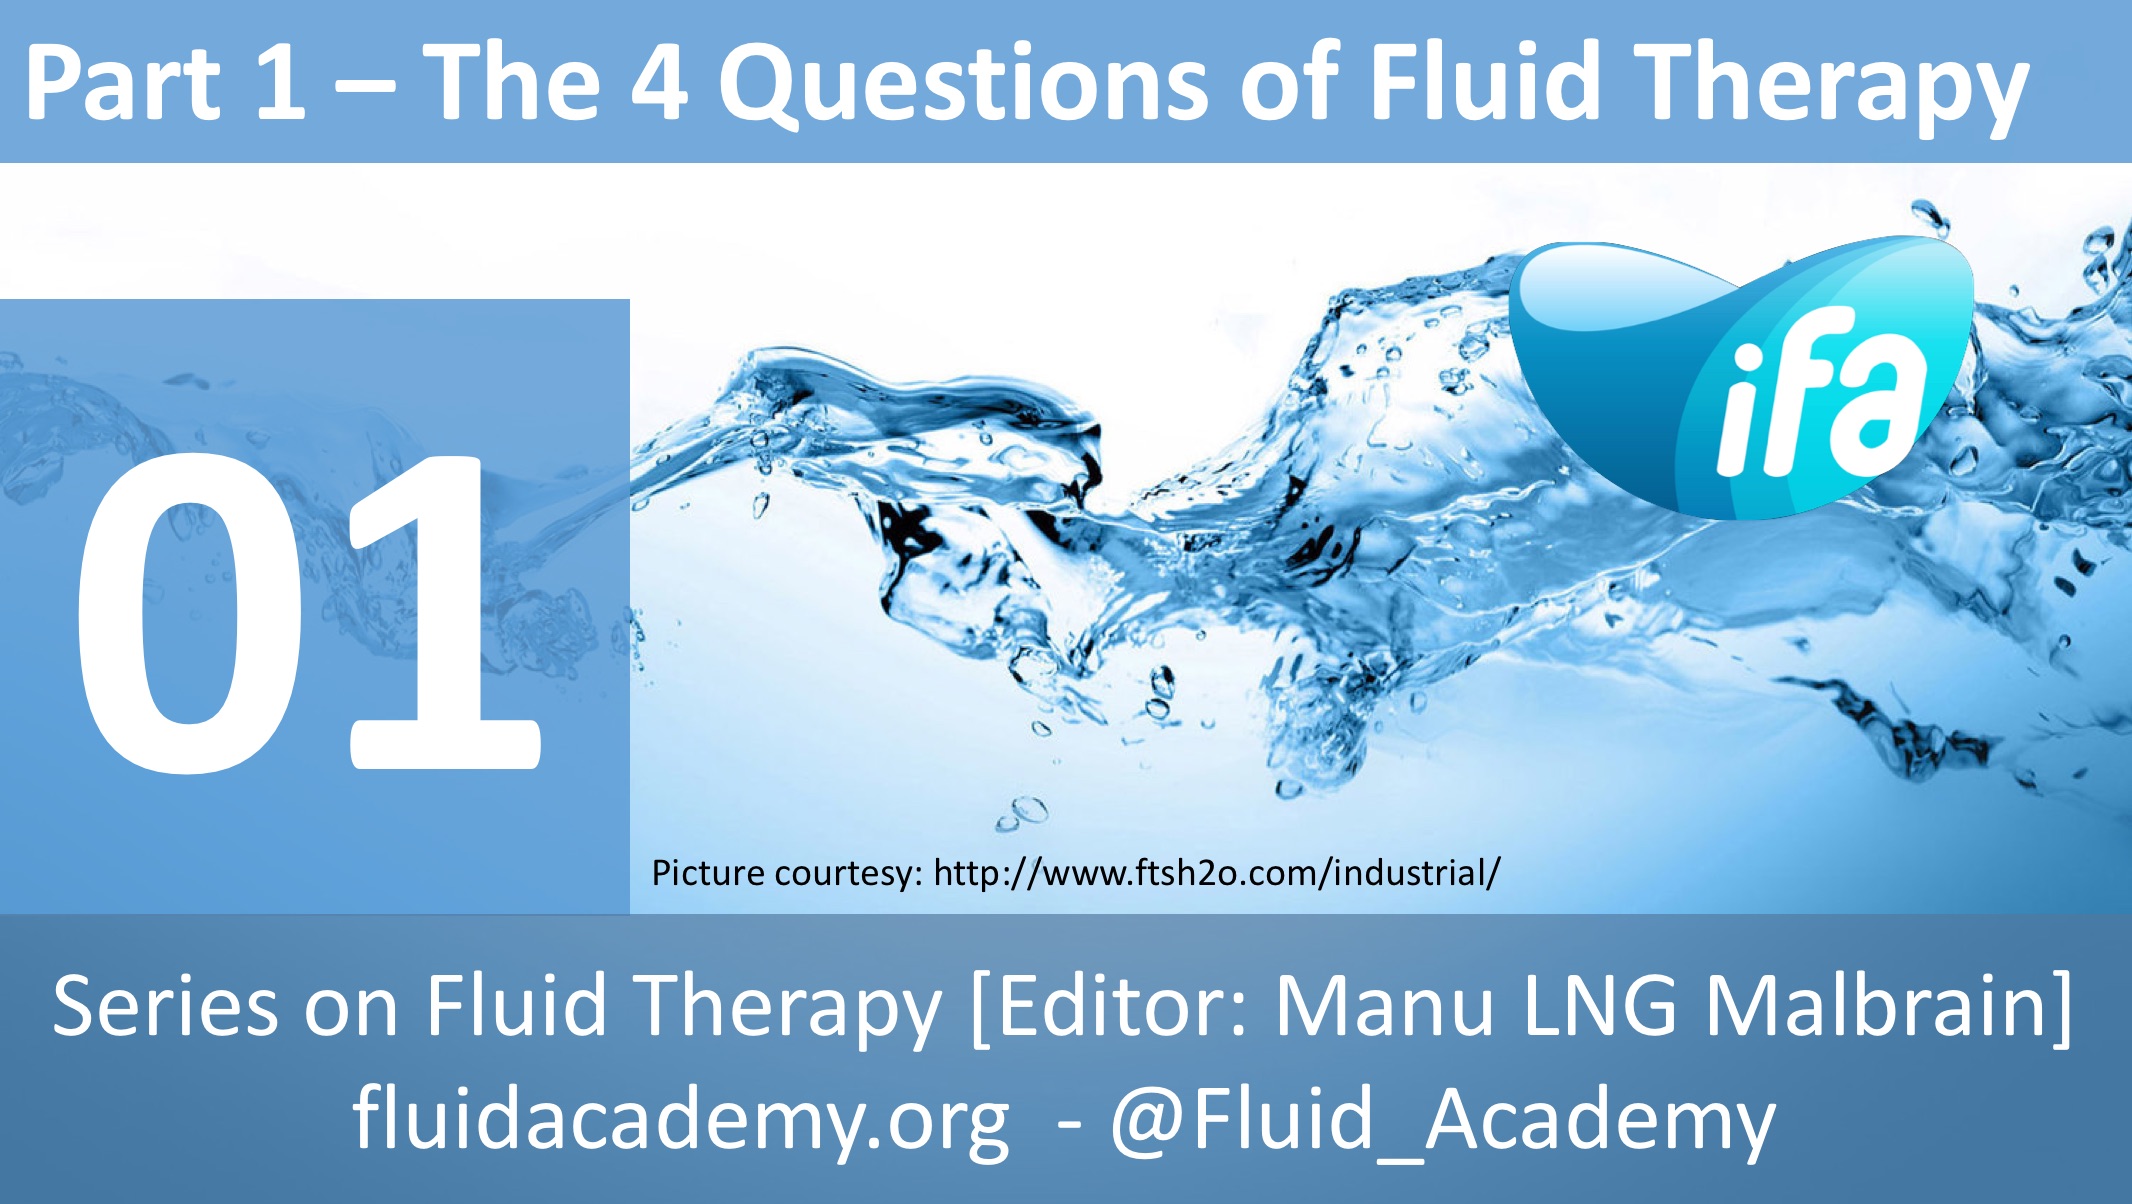 The four questions of fluid therapy (Part 1.5.)